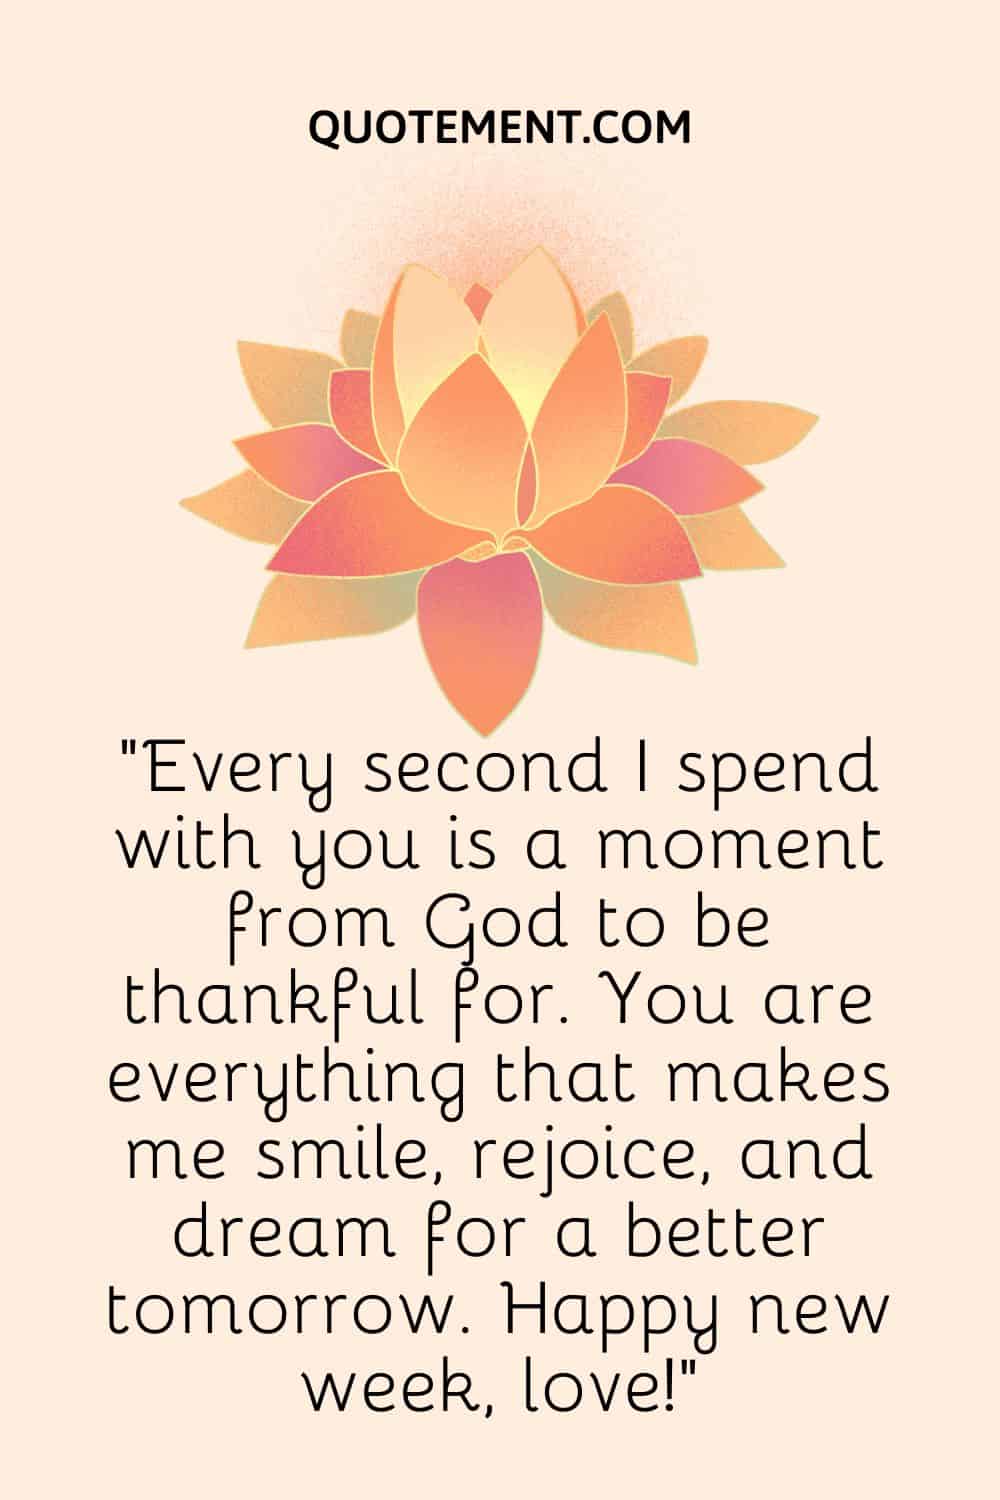 Every second I spend with you is a moment from God to be thankful for